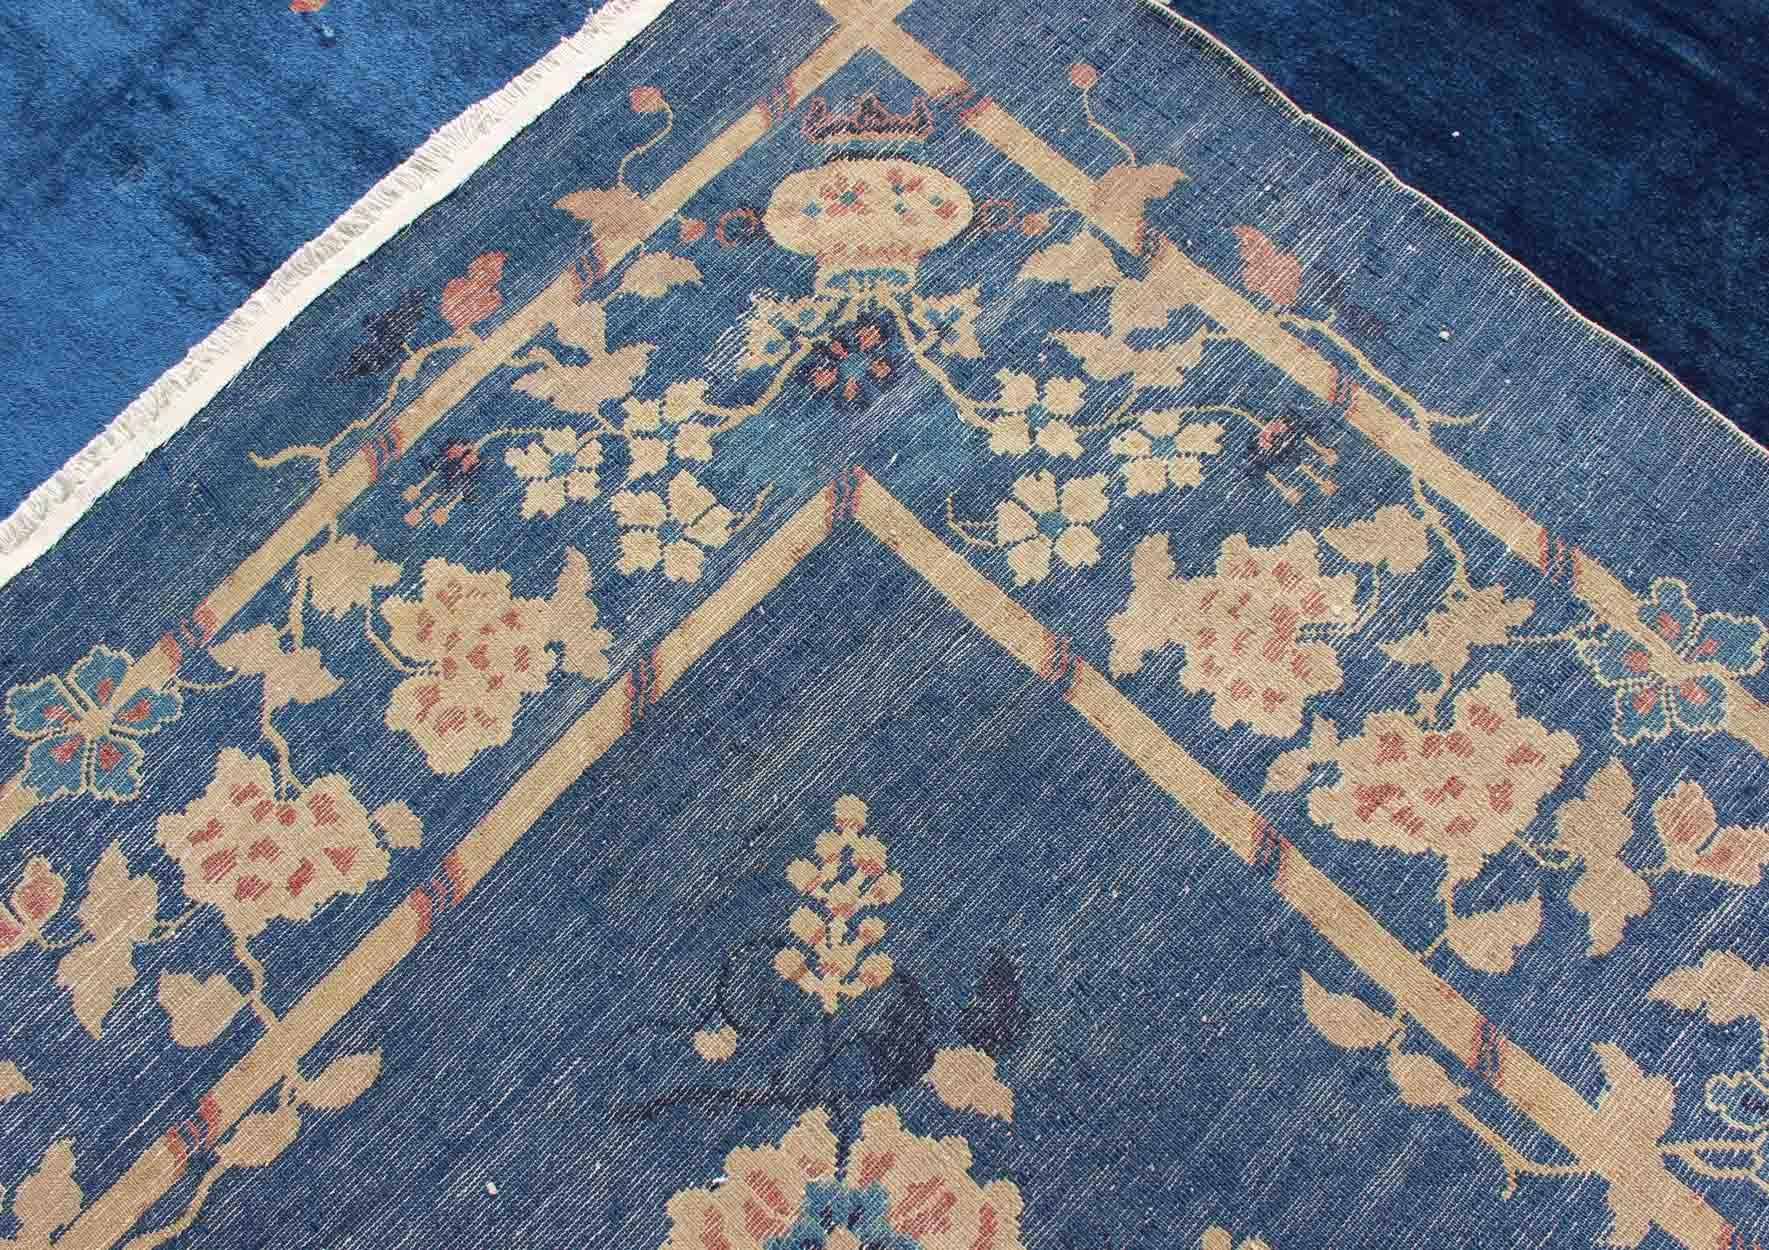 Antique Chinese Peking Rug in Navy Blue with Medallion Flower Vases and Vines  For Sale 8